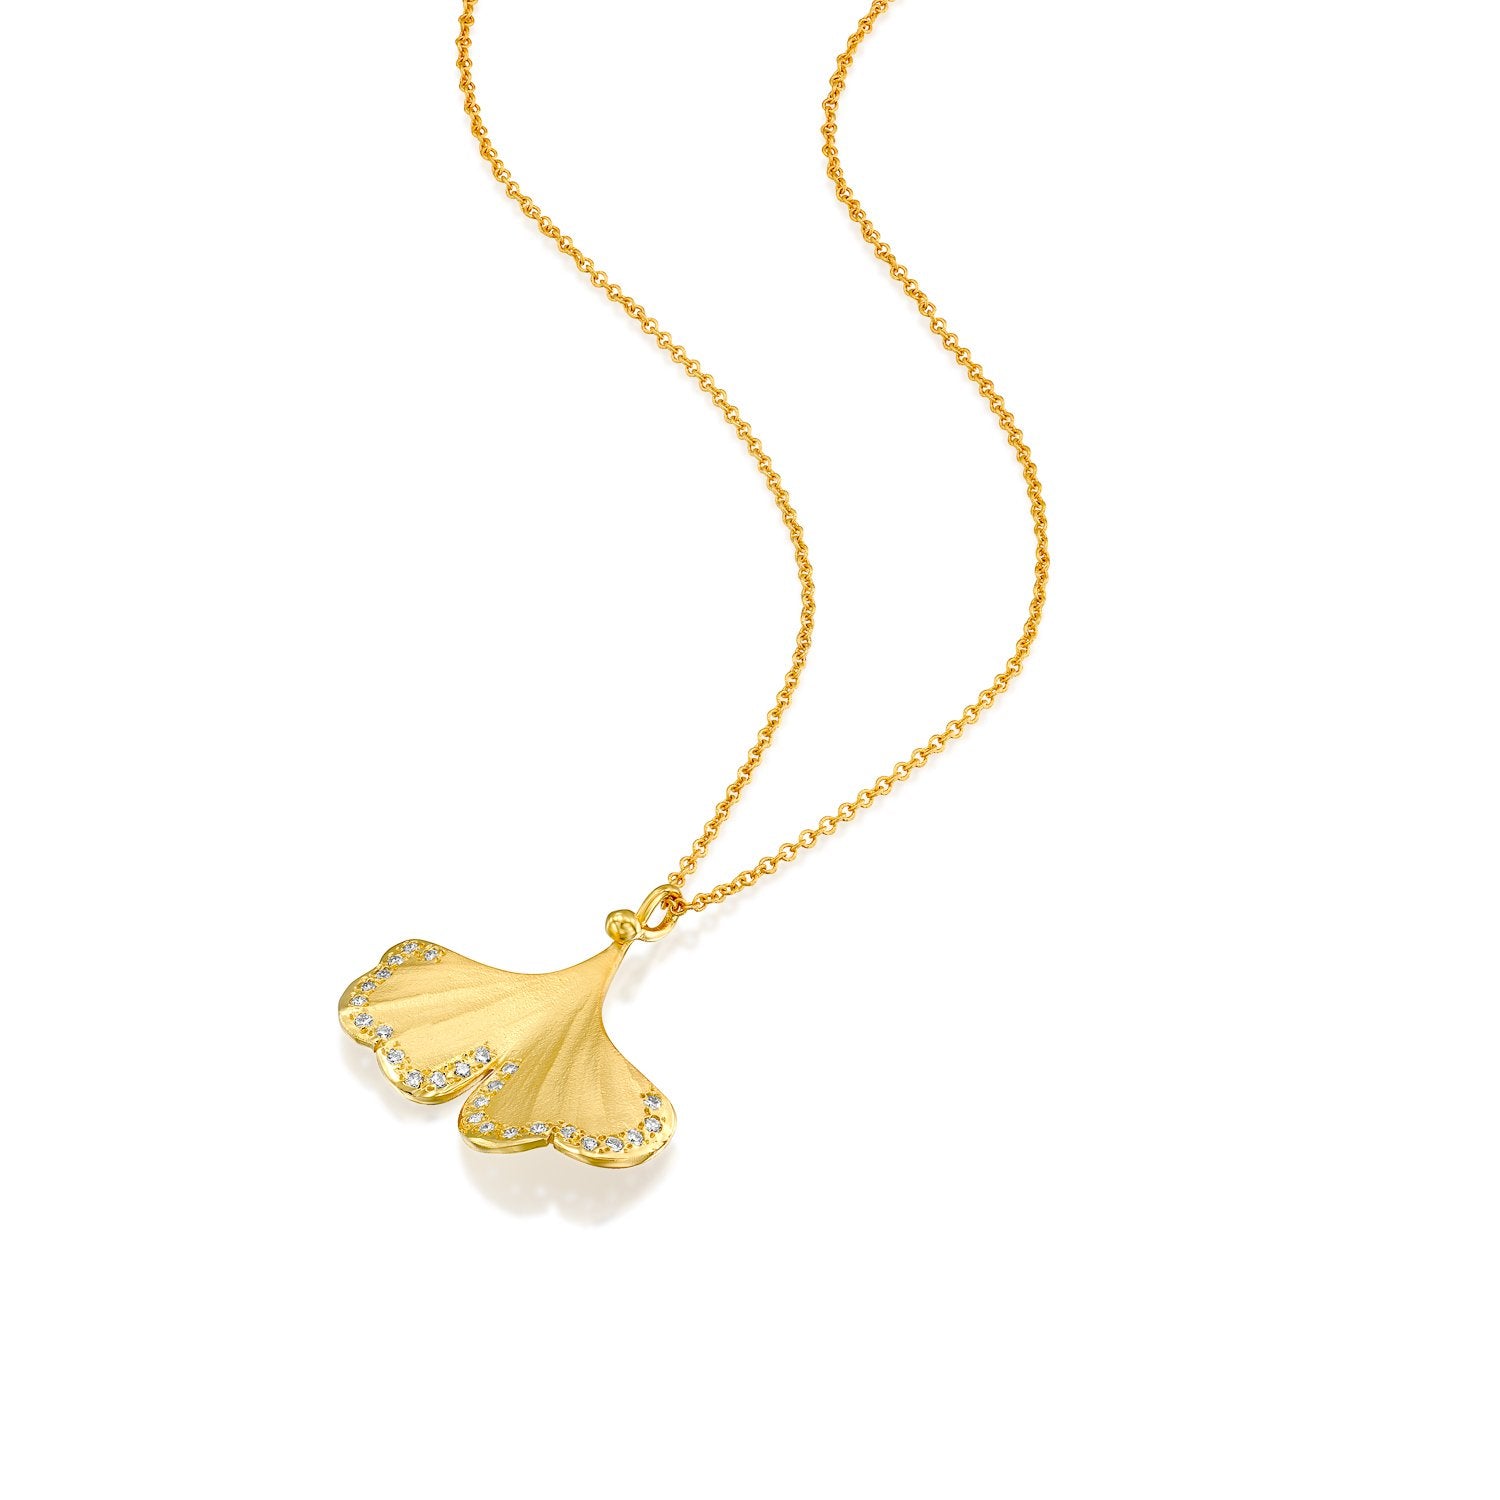 7088 - 14kt special engraving yellow gold & diamond ginkgo necklace